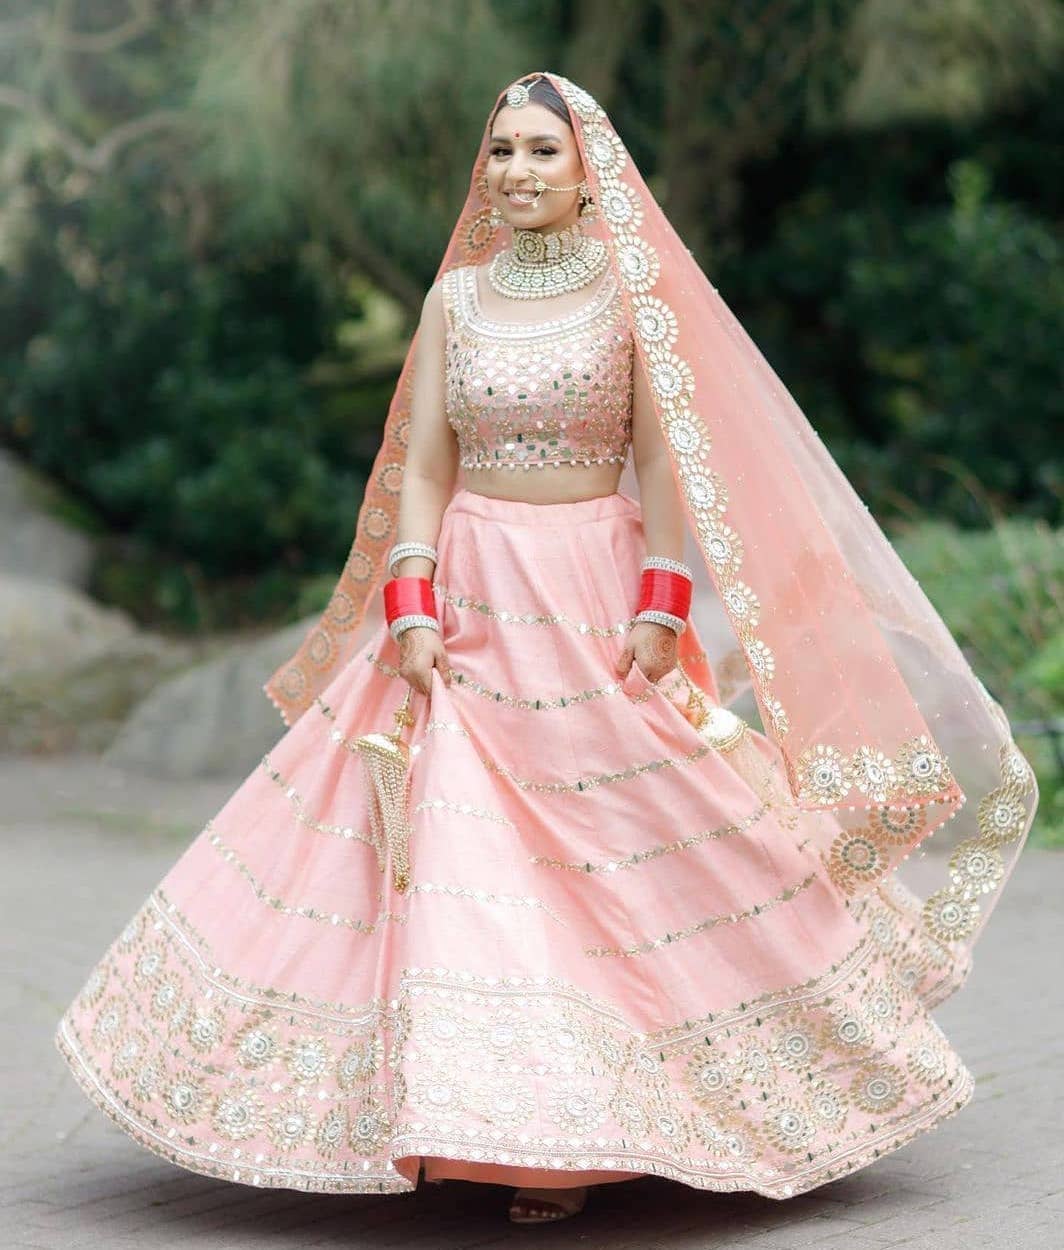 Lehenga Dupatta A to Z – All about Types and Draping Styles